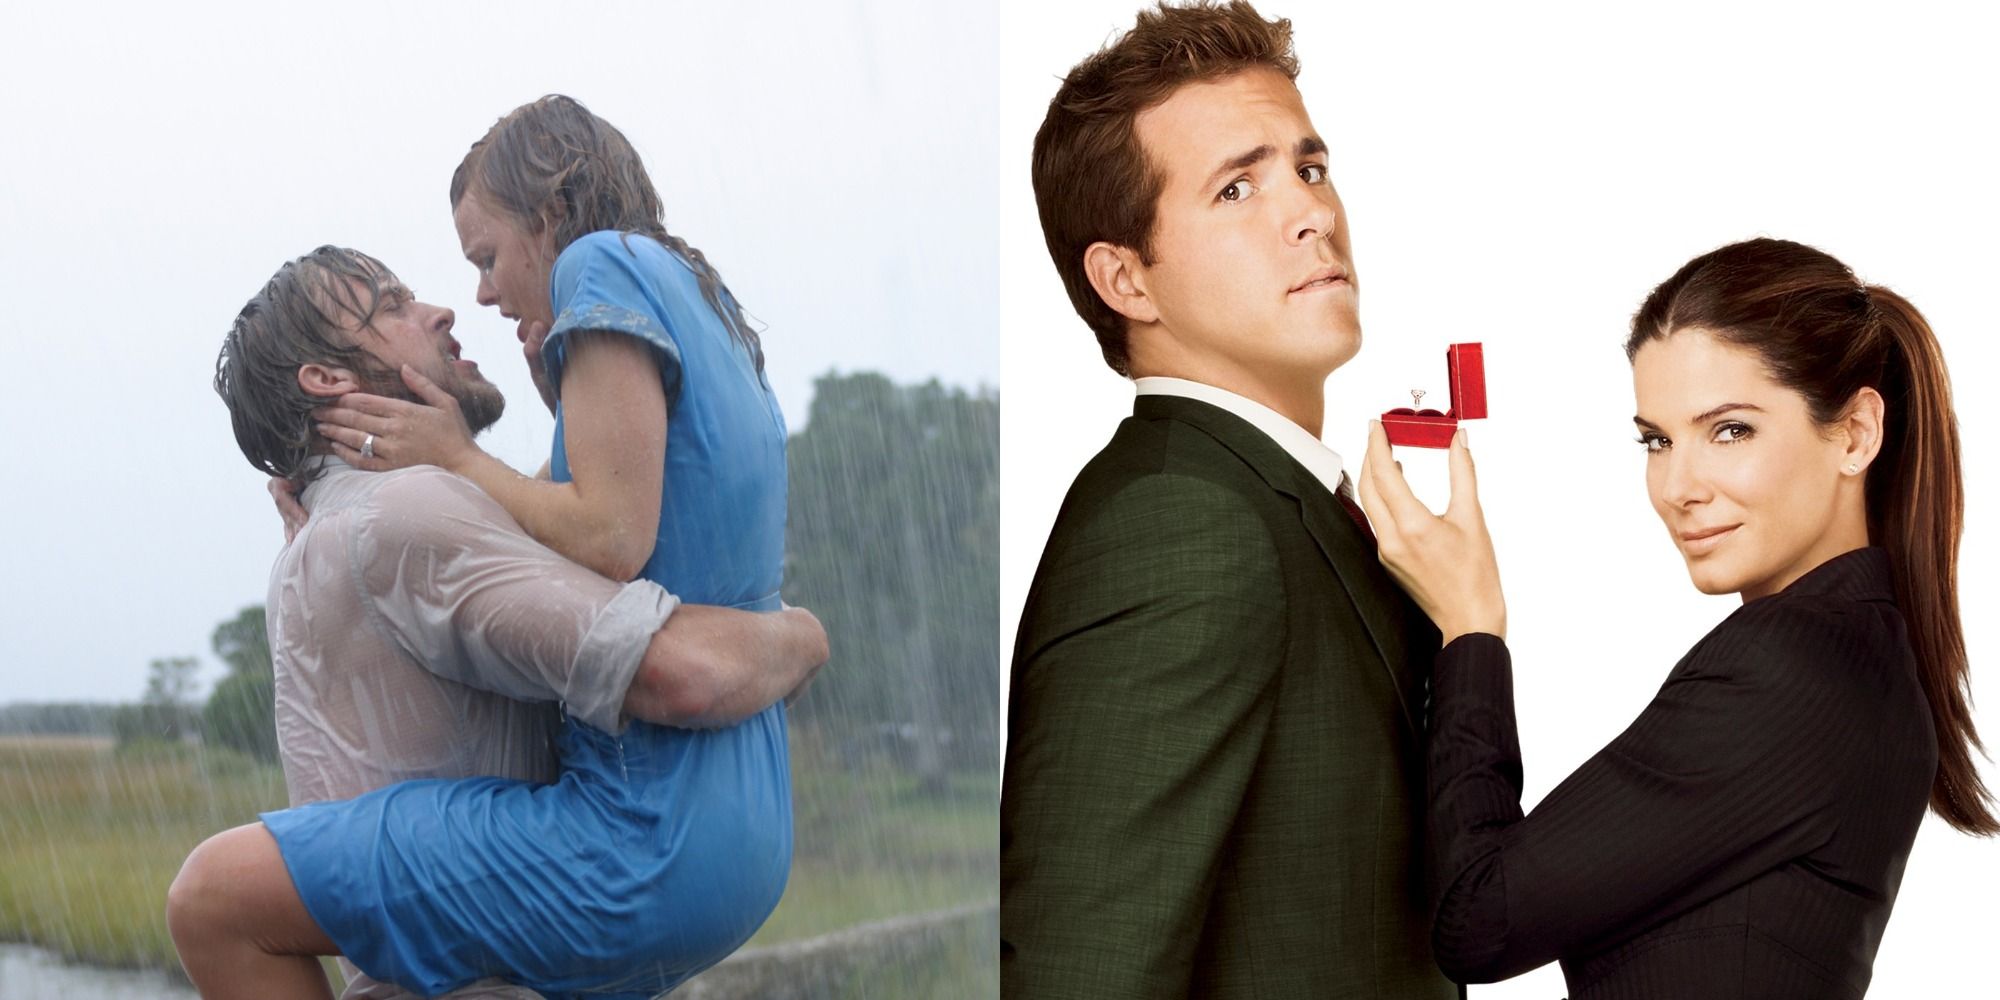 Split image showing a scene from The Notebook and the poster for The Proposal